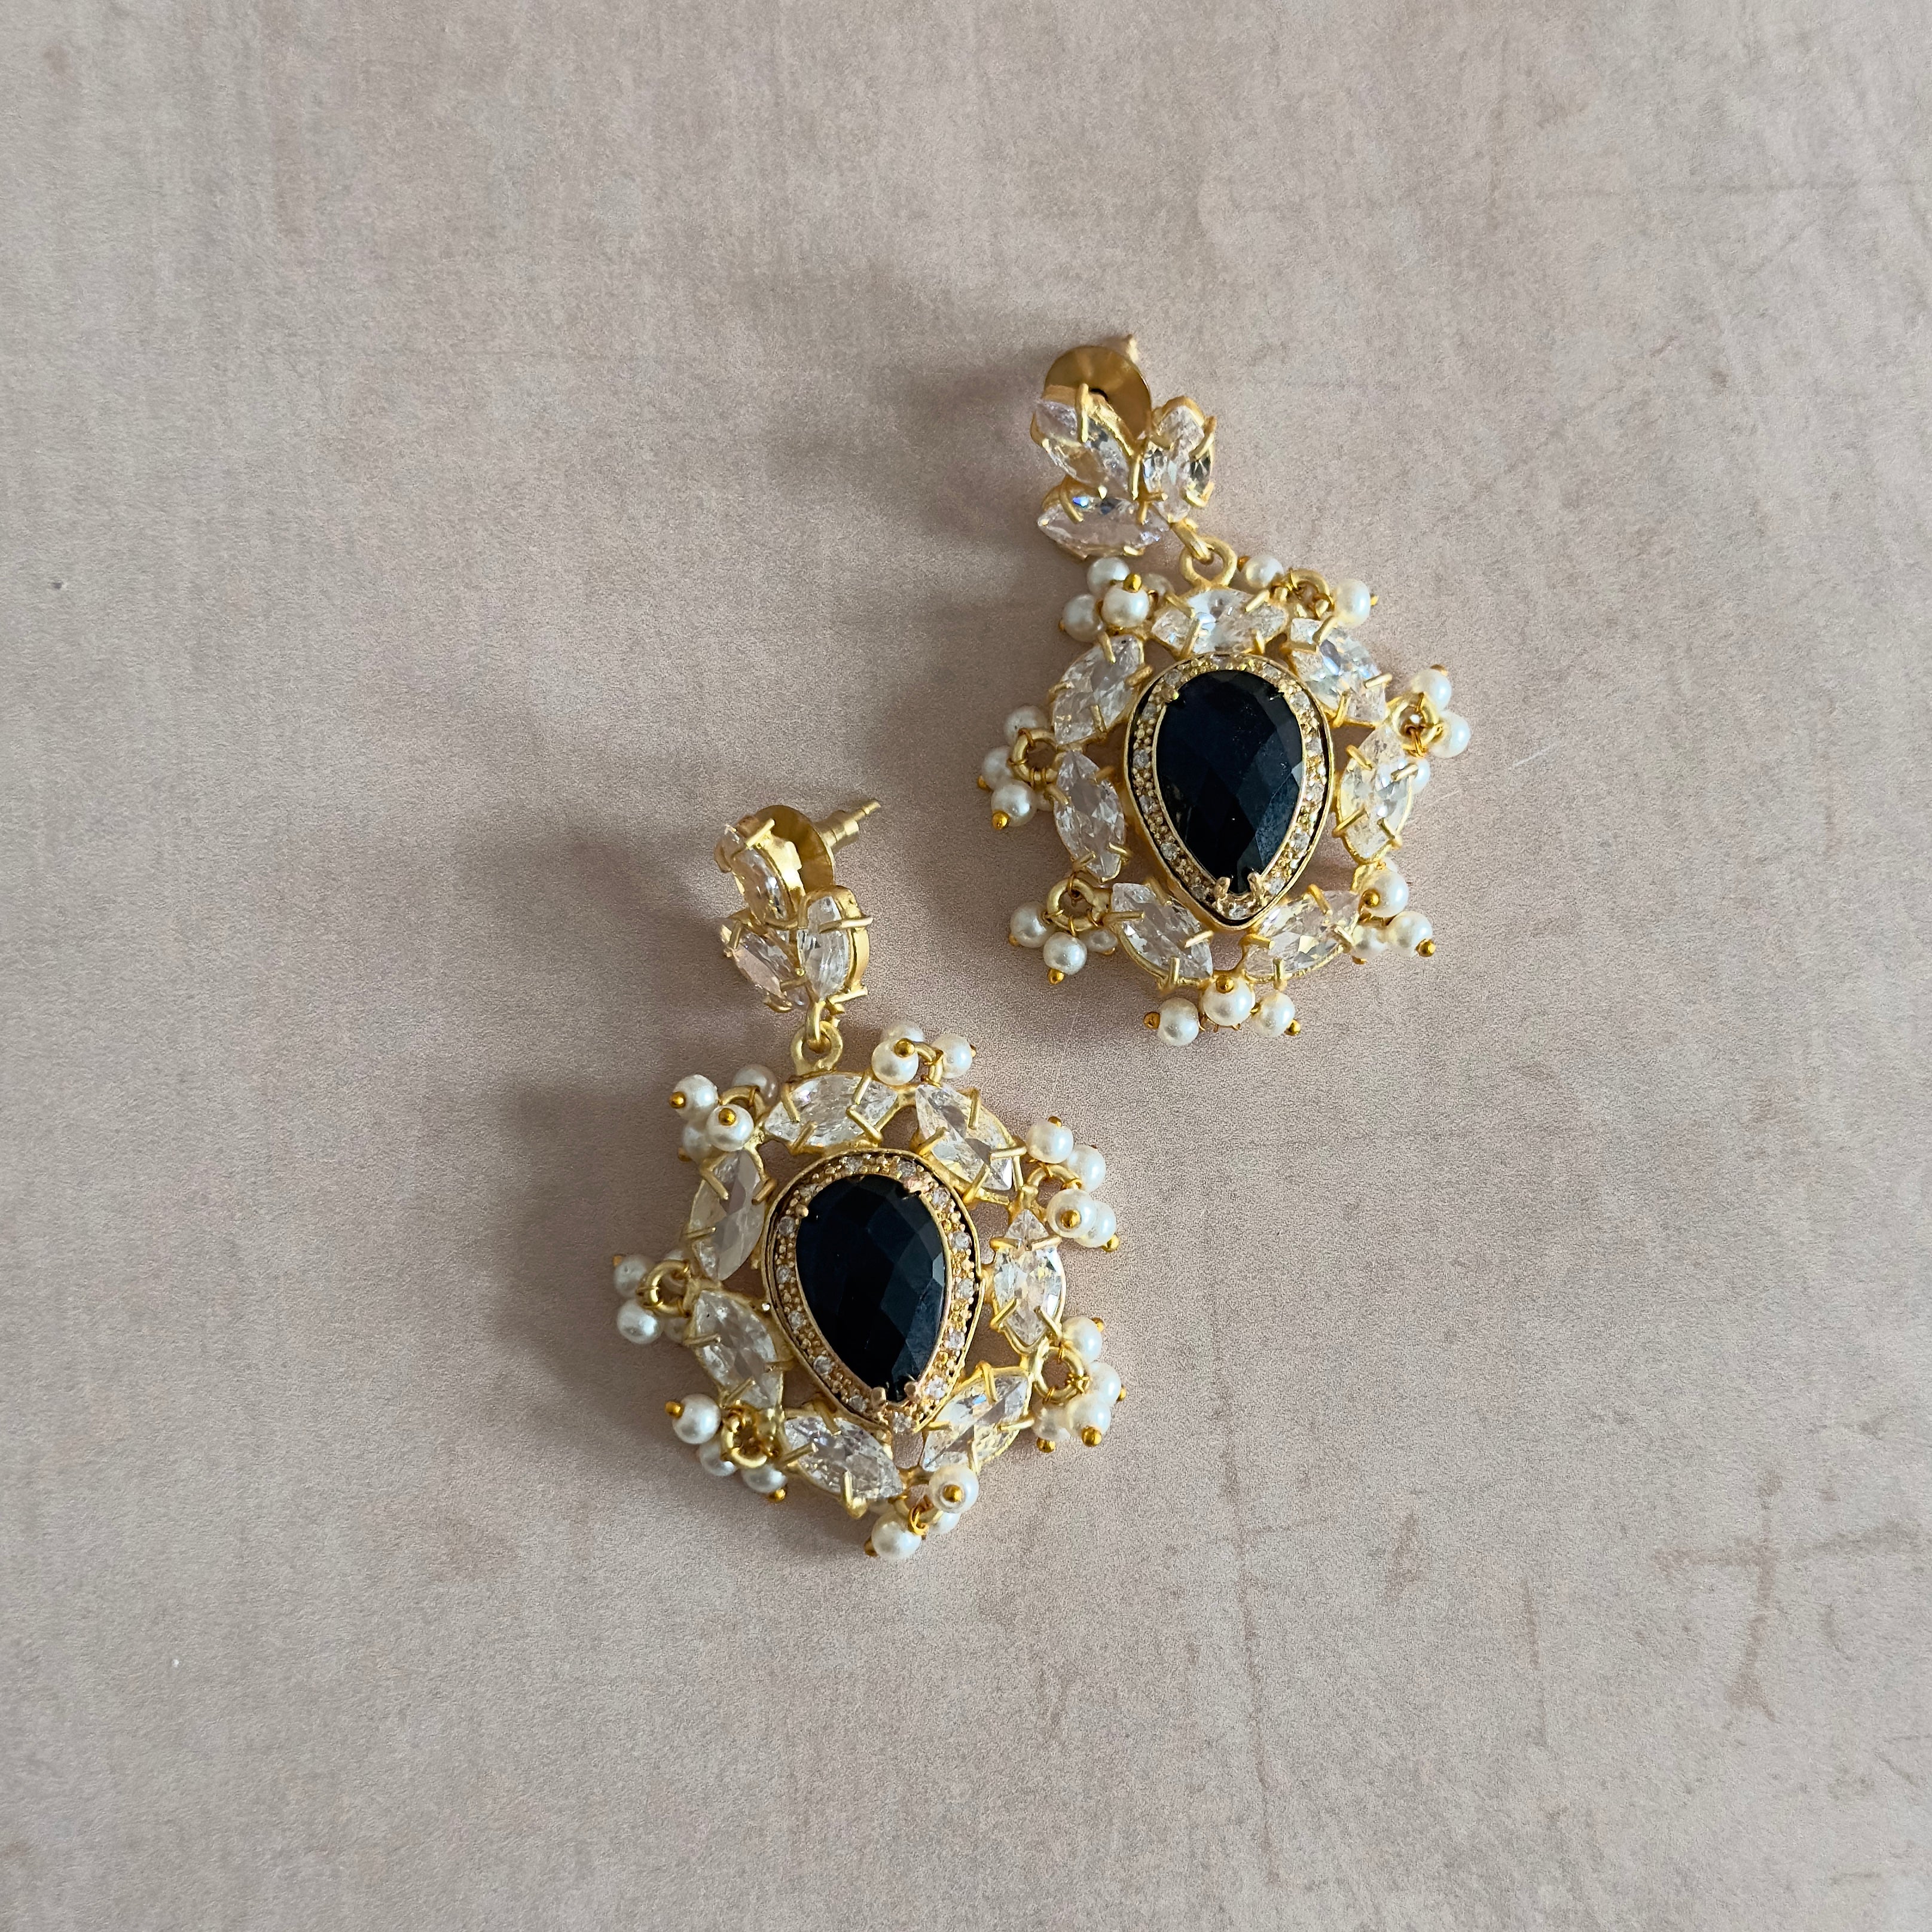 Elevate your style with our Tahira Black Crystal Drop Earrings. Crafted with stunning black onyx and sparkling cubic zirconia, these statement earrings add a touch of sophistication and glamour to any outfit. Fashion meets elegance with these must-have accessories.